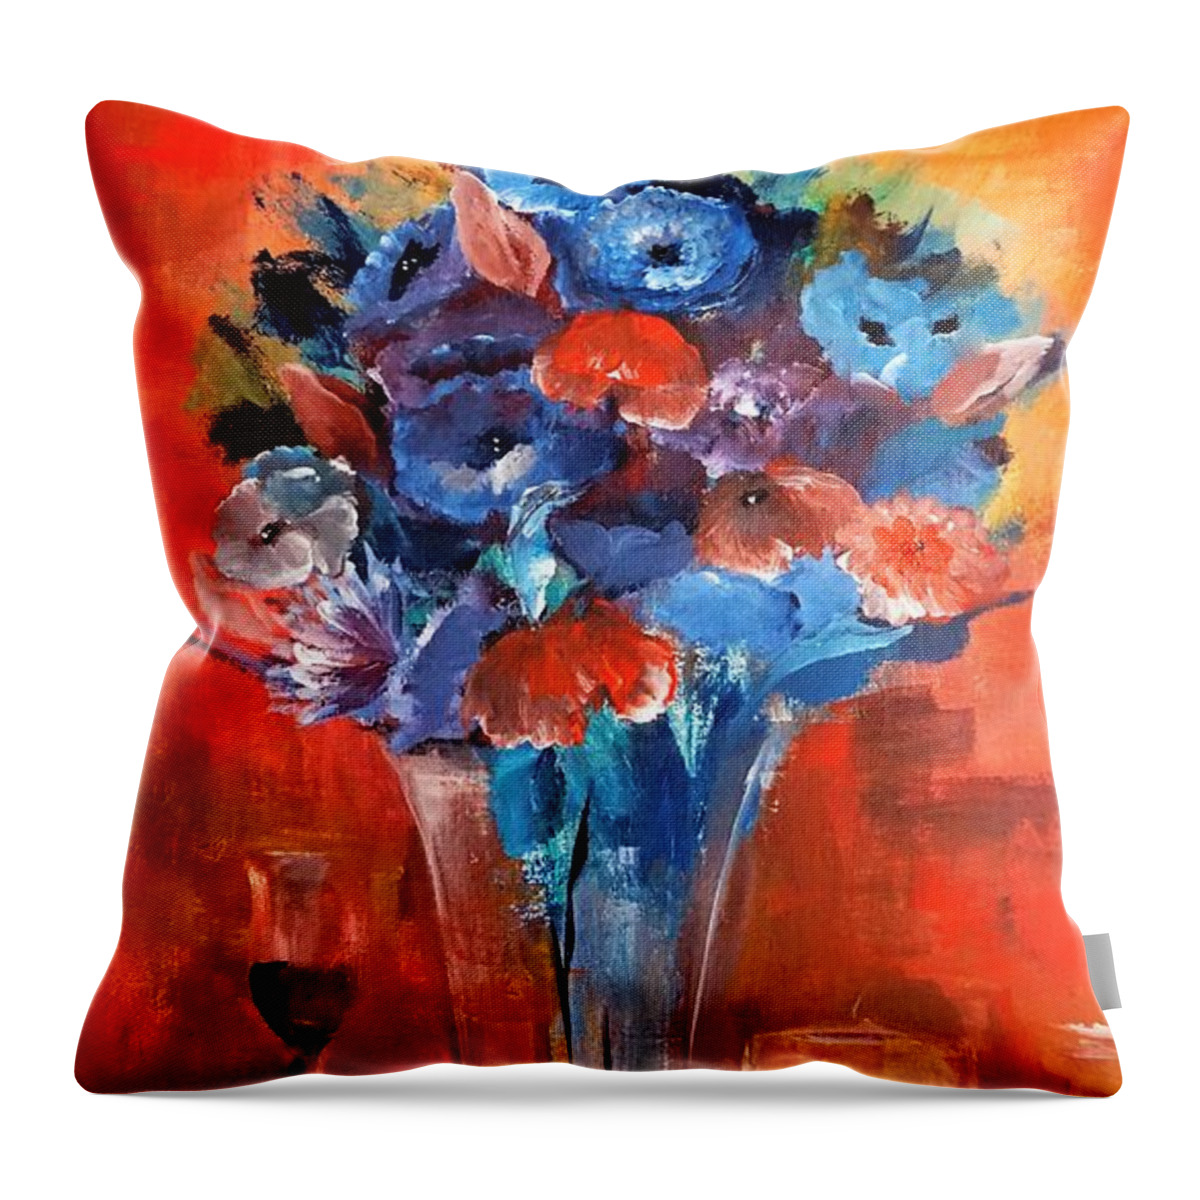 Blue Throw Pillow featuring the painting Blue In The Warmth Of Candlelight by Lisa Kaiser